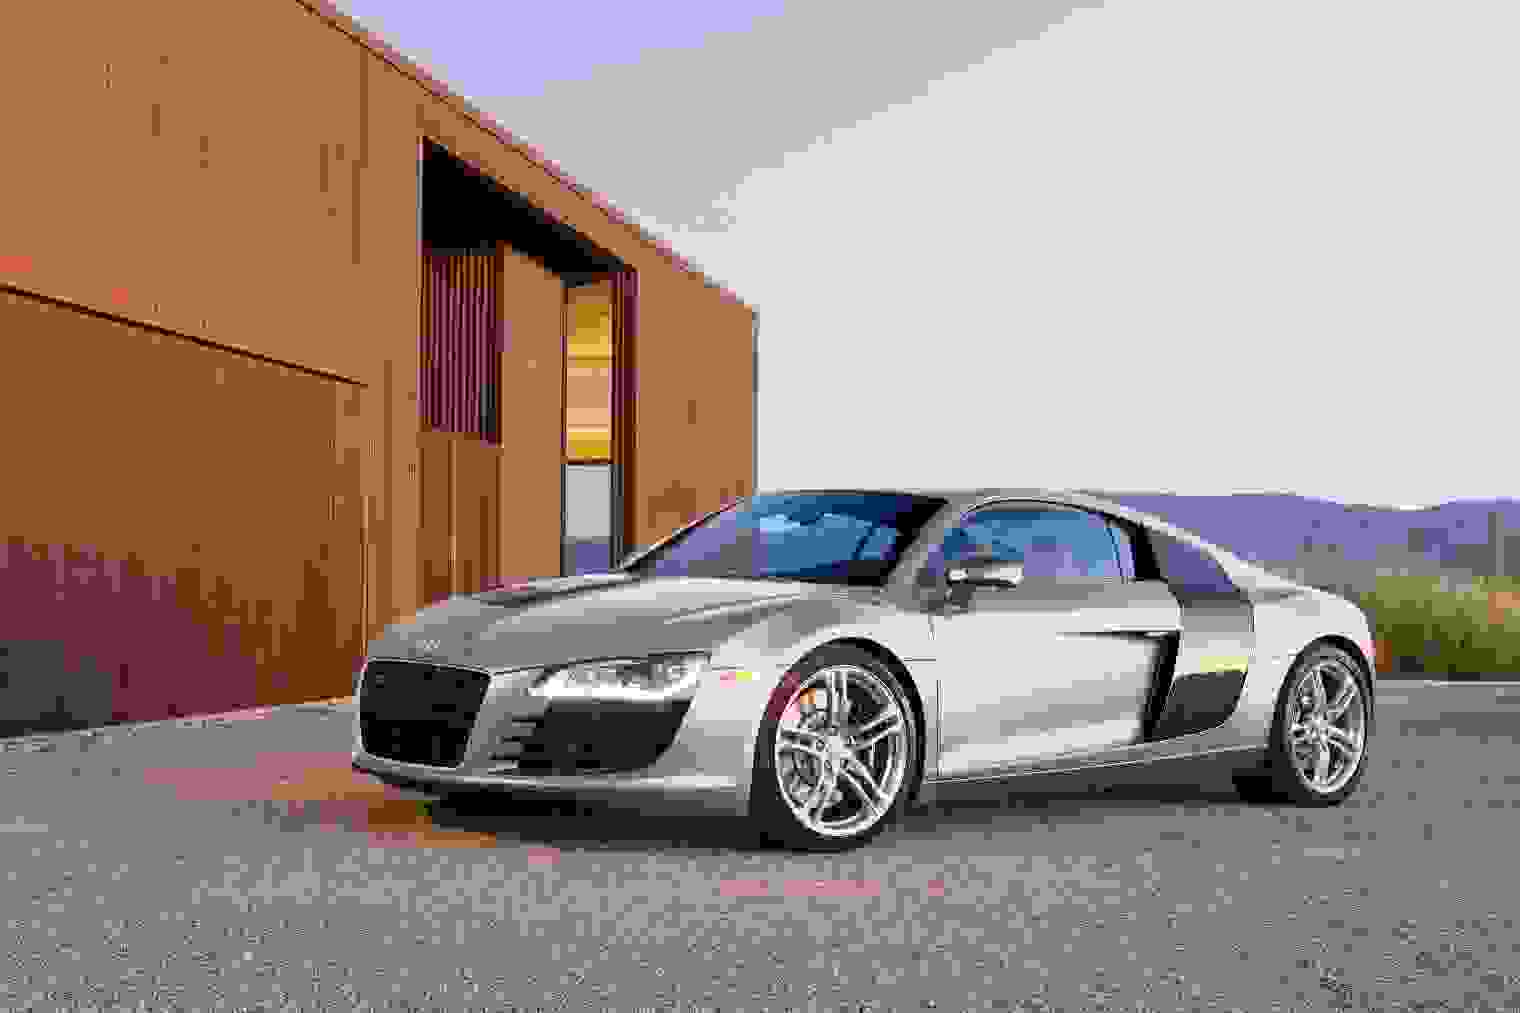 Audi R8 Buying Guide: The thinking man’s supercar